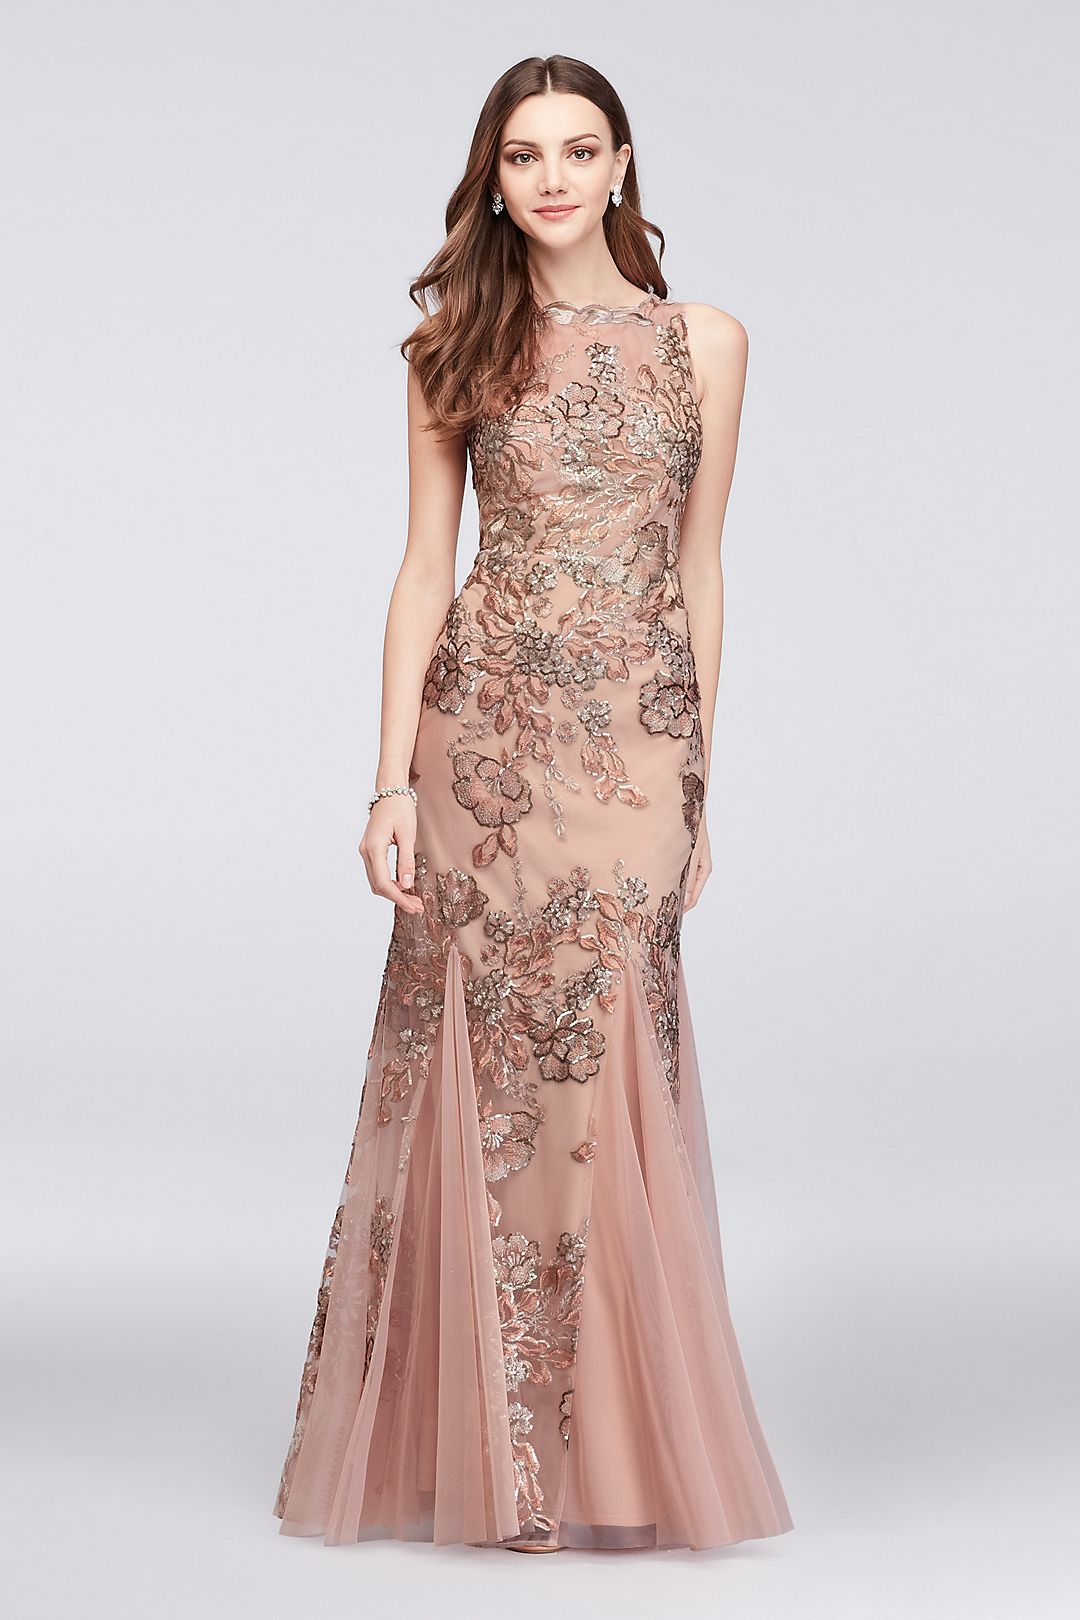 Embroidered Floral Sequin Mesh Mermaid Gown Image 1